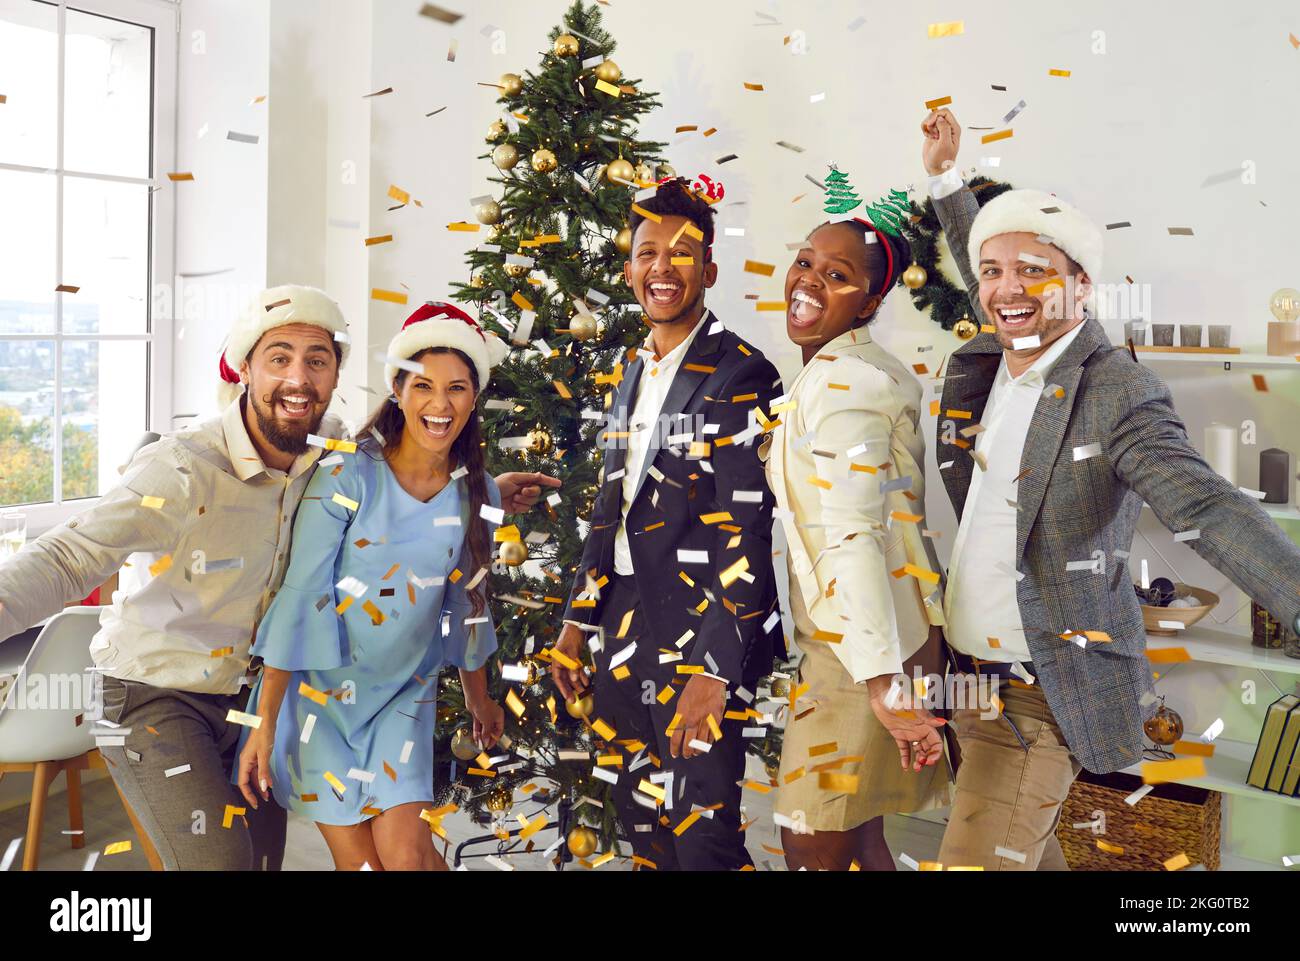 Group of happy joyful diverse friends having fun at Christmas party with confetti Stock Photo